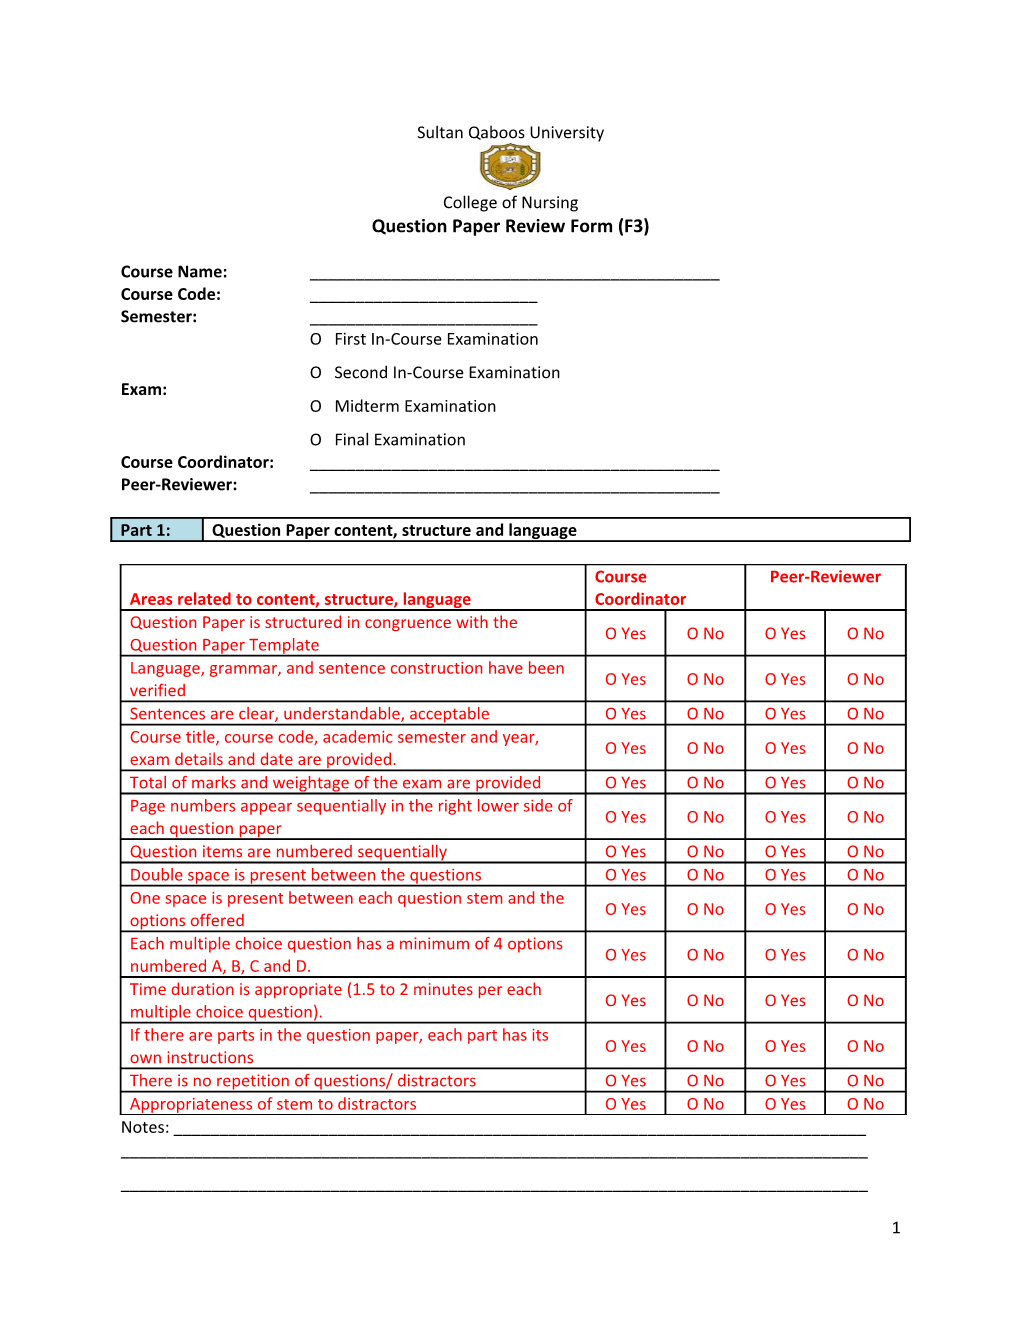 Question Paper Review Form (F3)